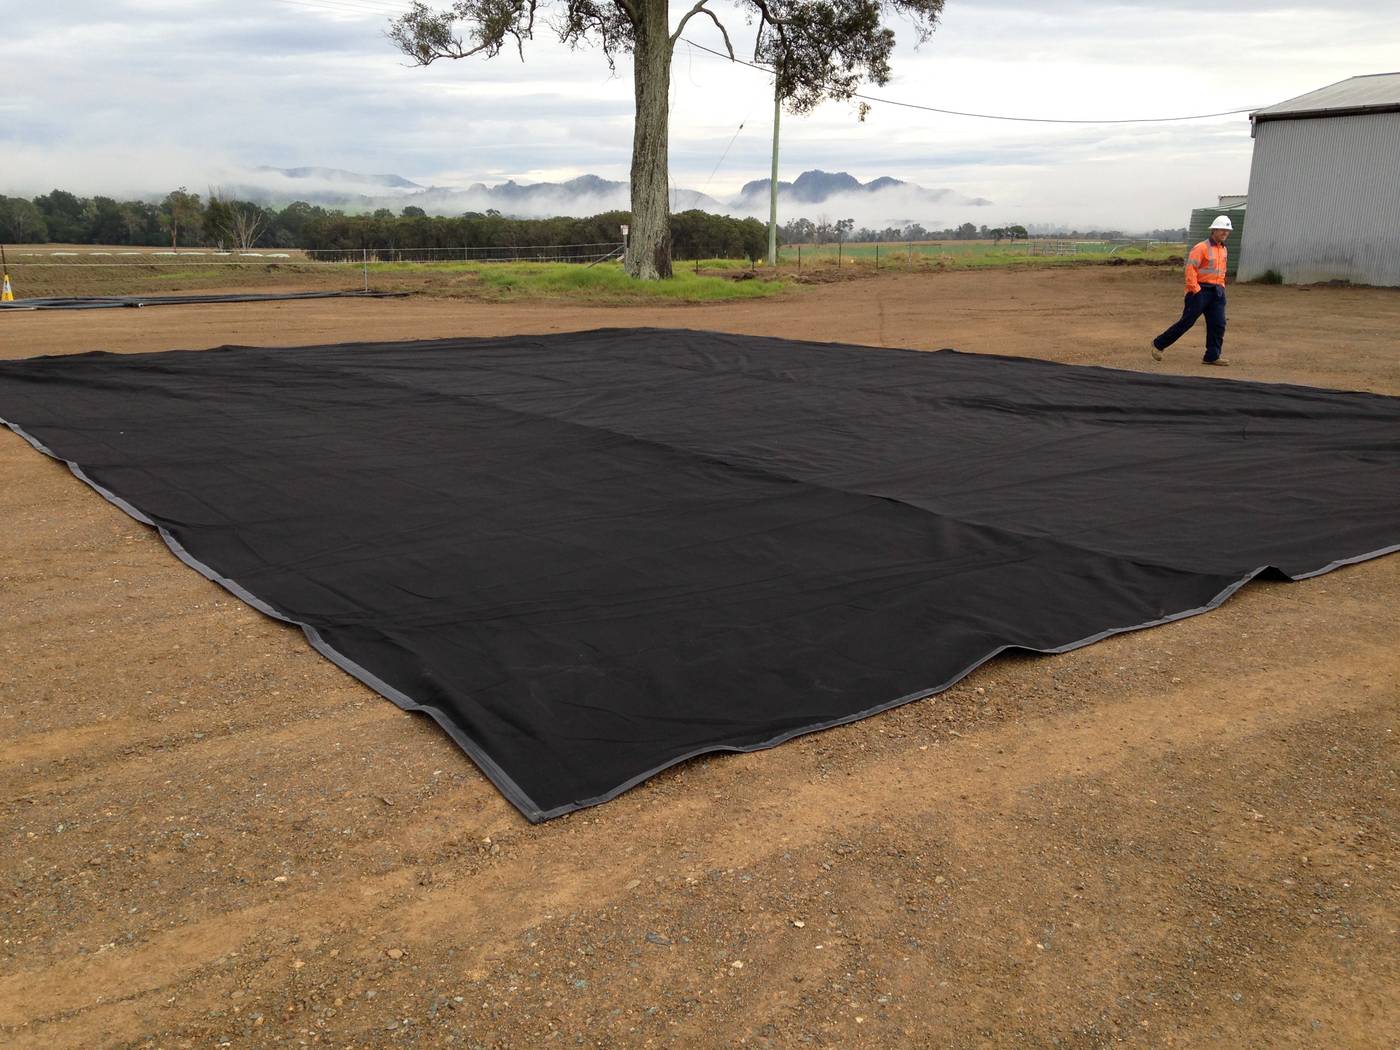 Chatoyer 10 x 15 metre Ground Mat deployed for collapsible bund